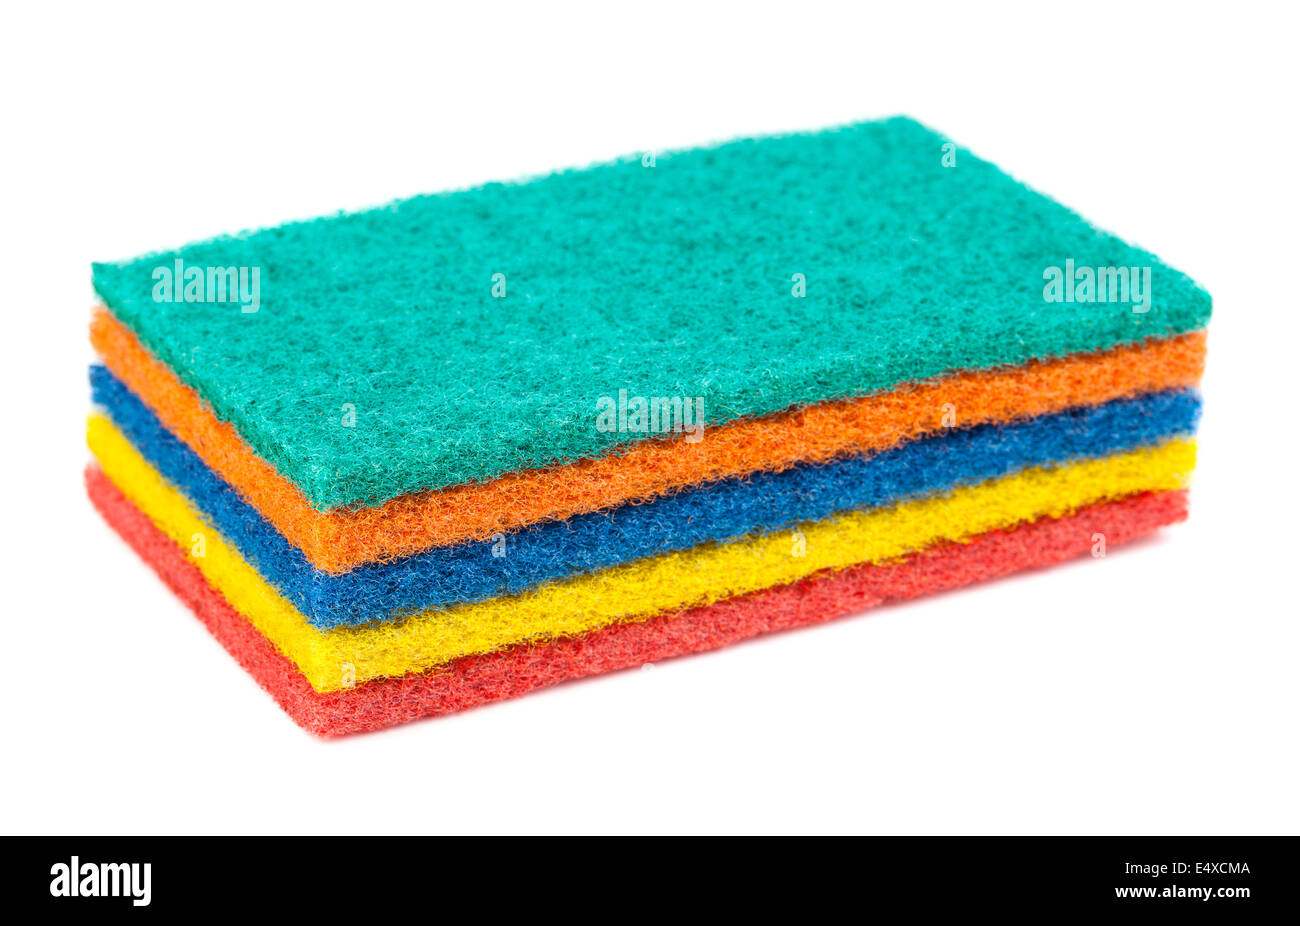 Cleaning sponges Stock Photo